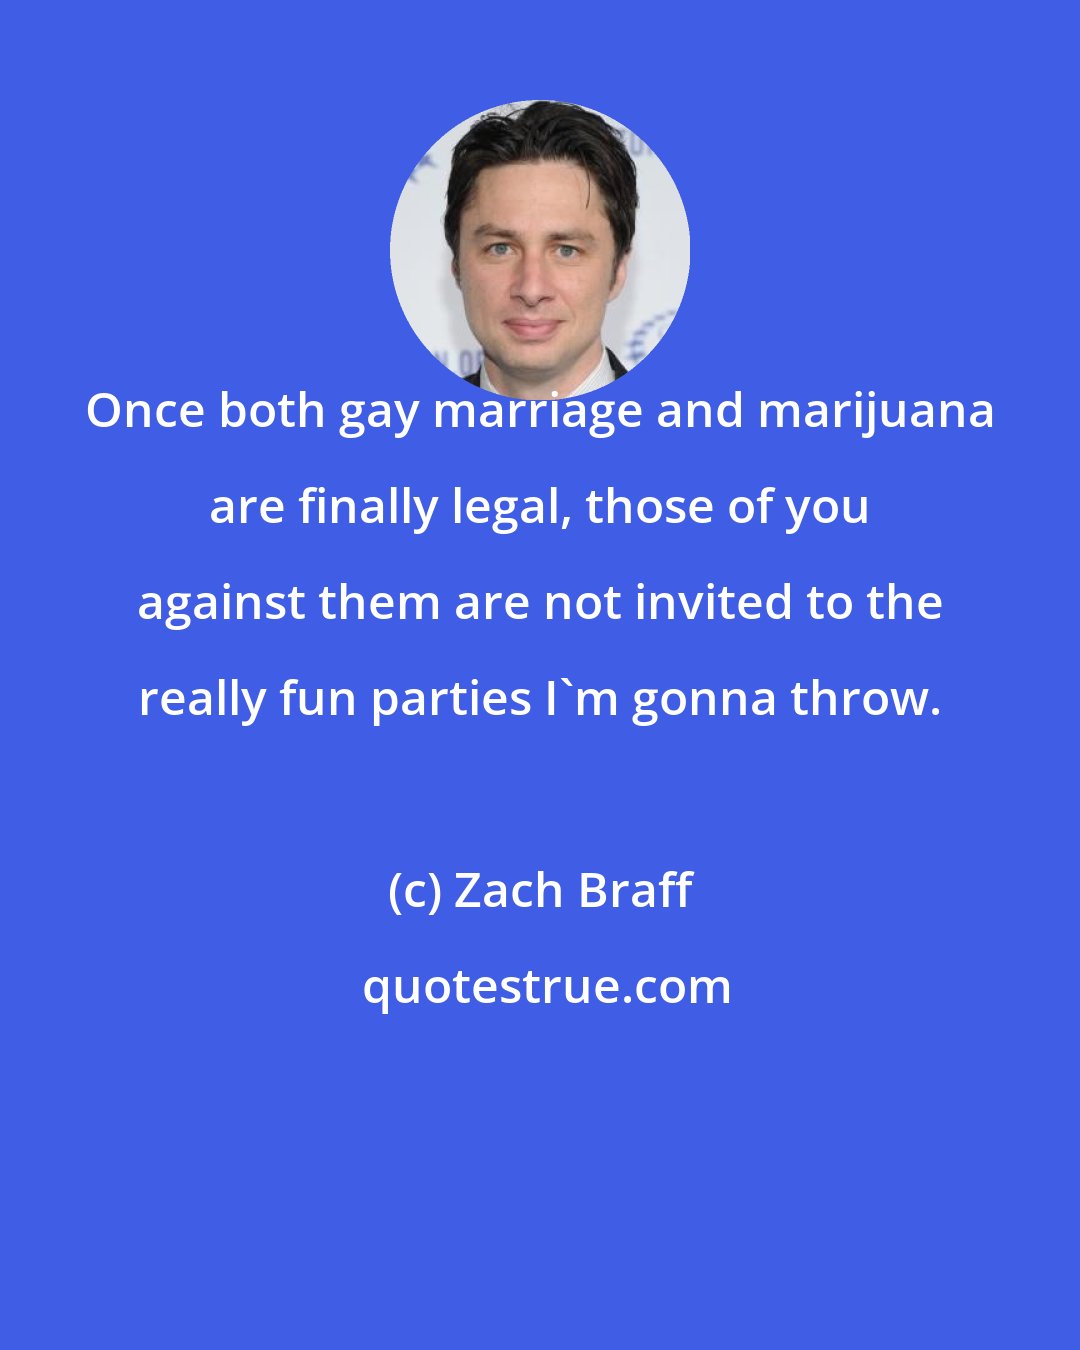 Zach Braff: Once both gay marriage and marijuana are finally legal, those of you against them are not invited to the really fun parties I'm gonna throw.